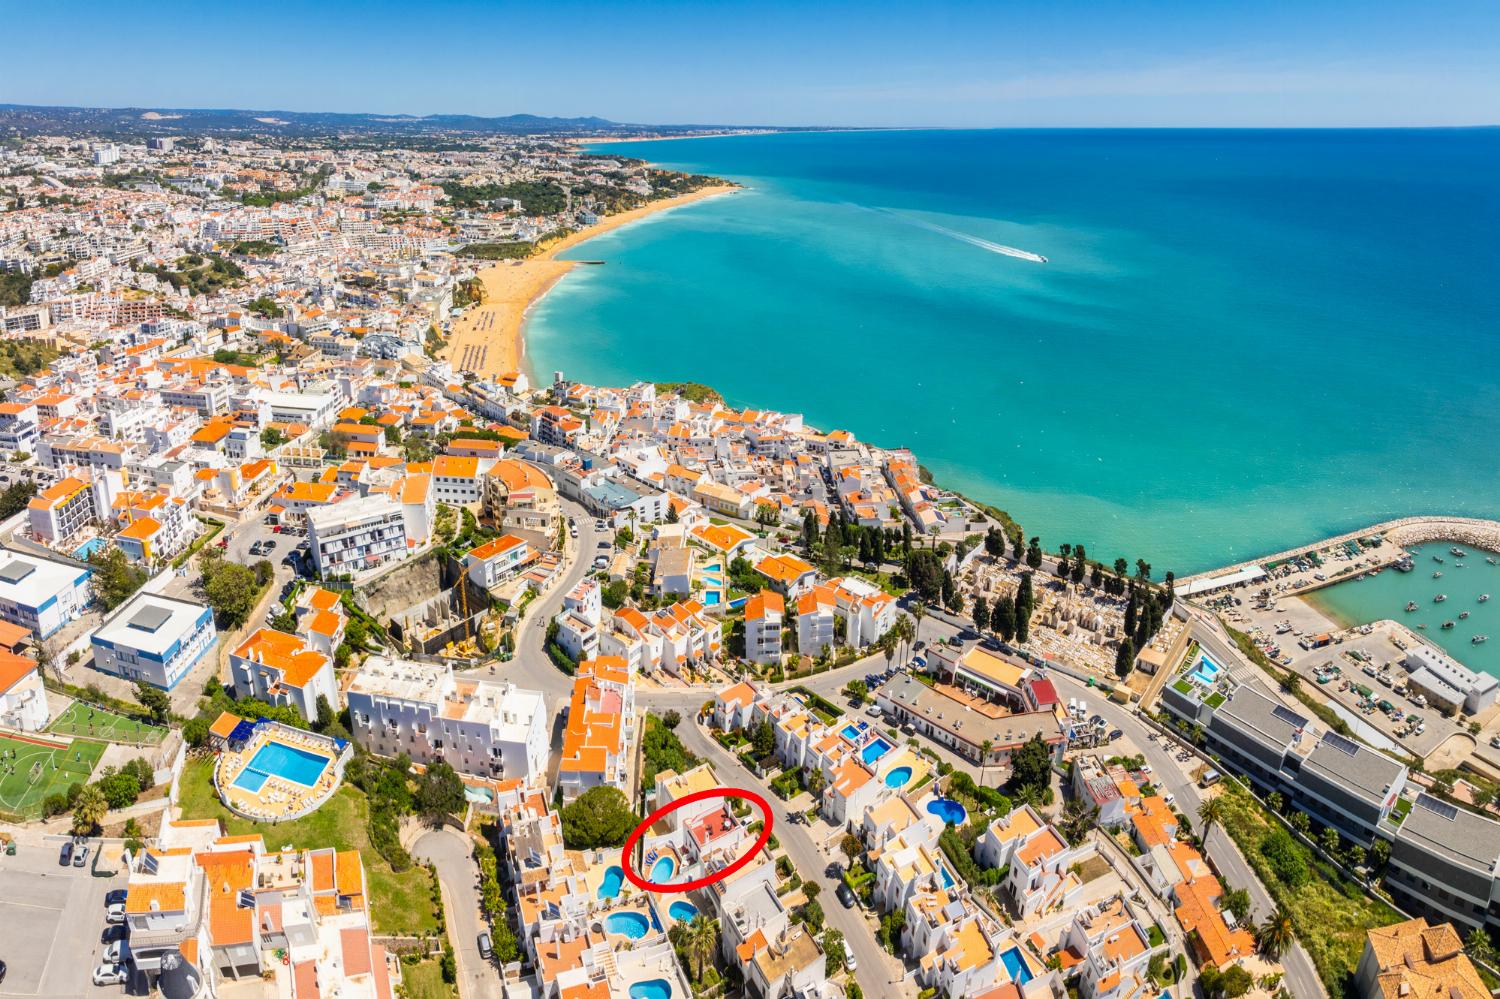 Aerial view of Albufeira showing location of villa